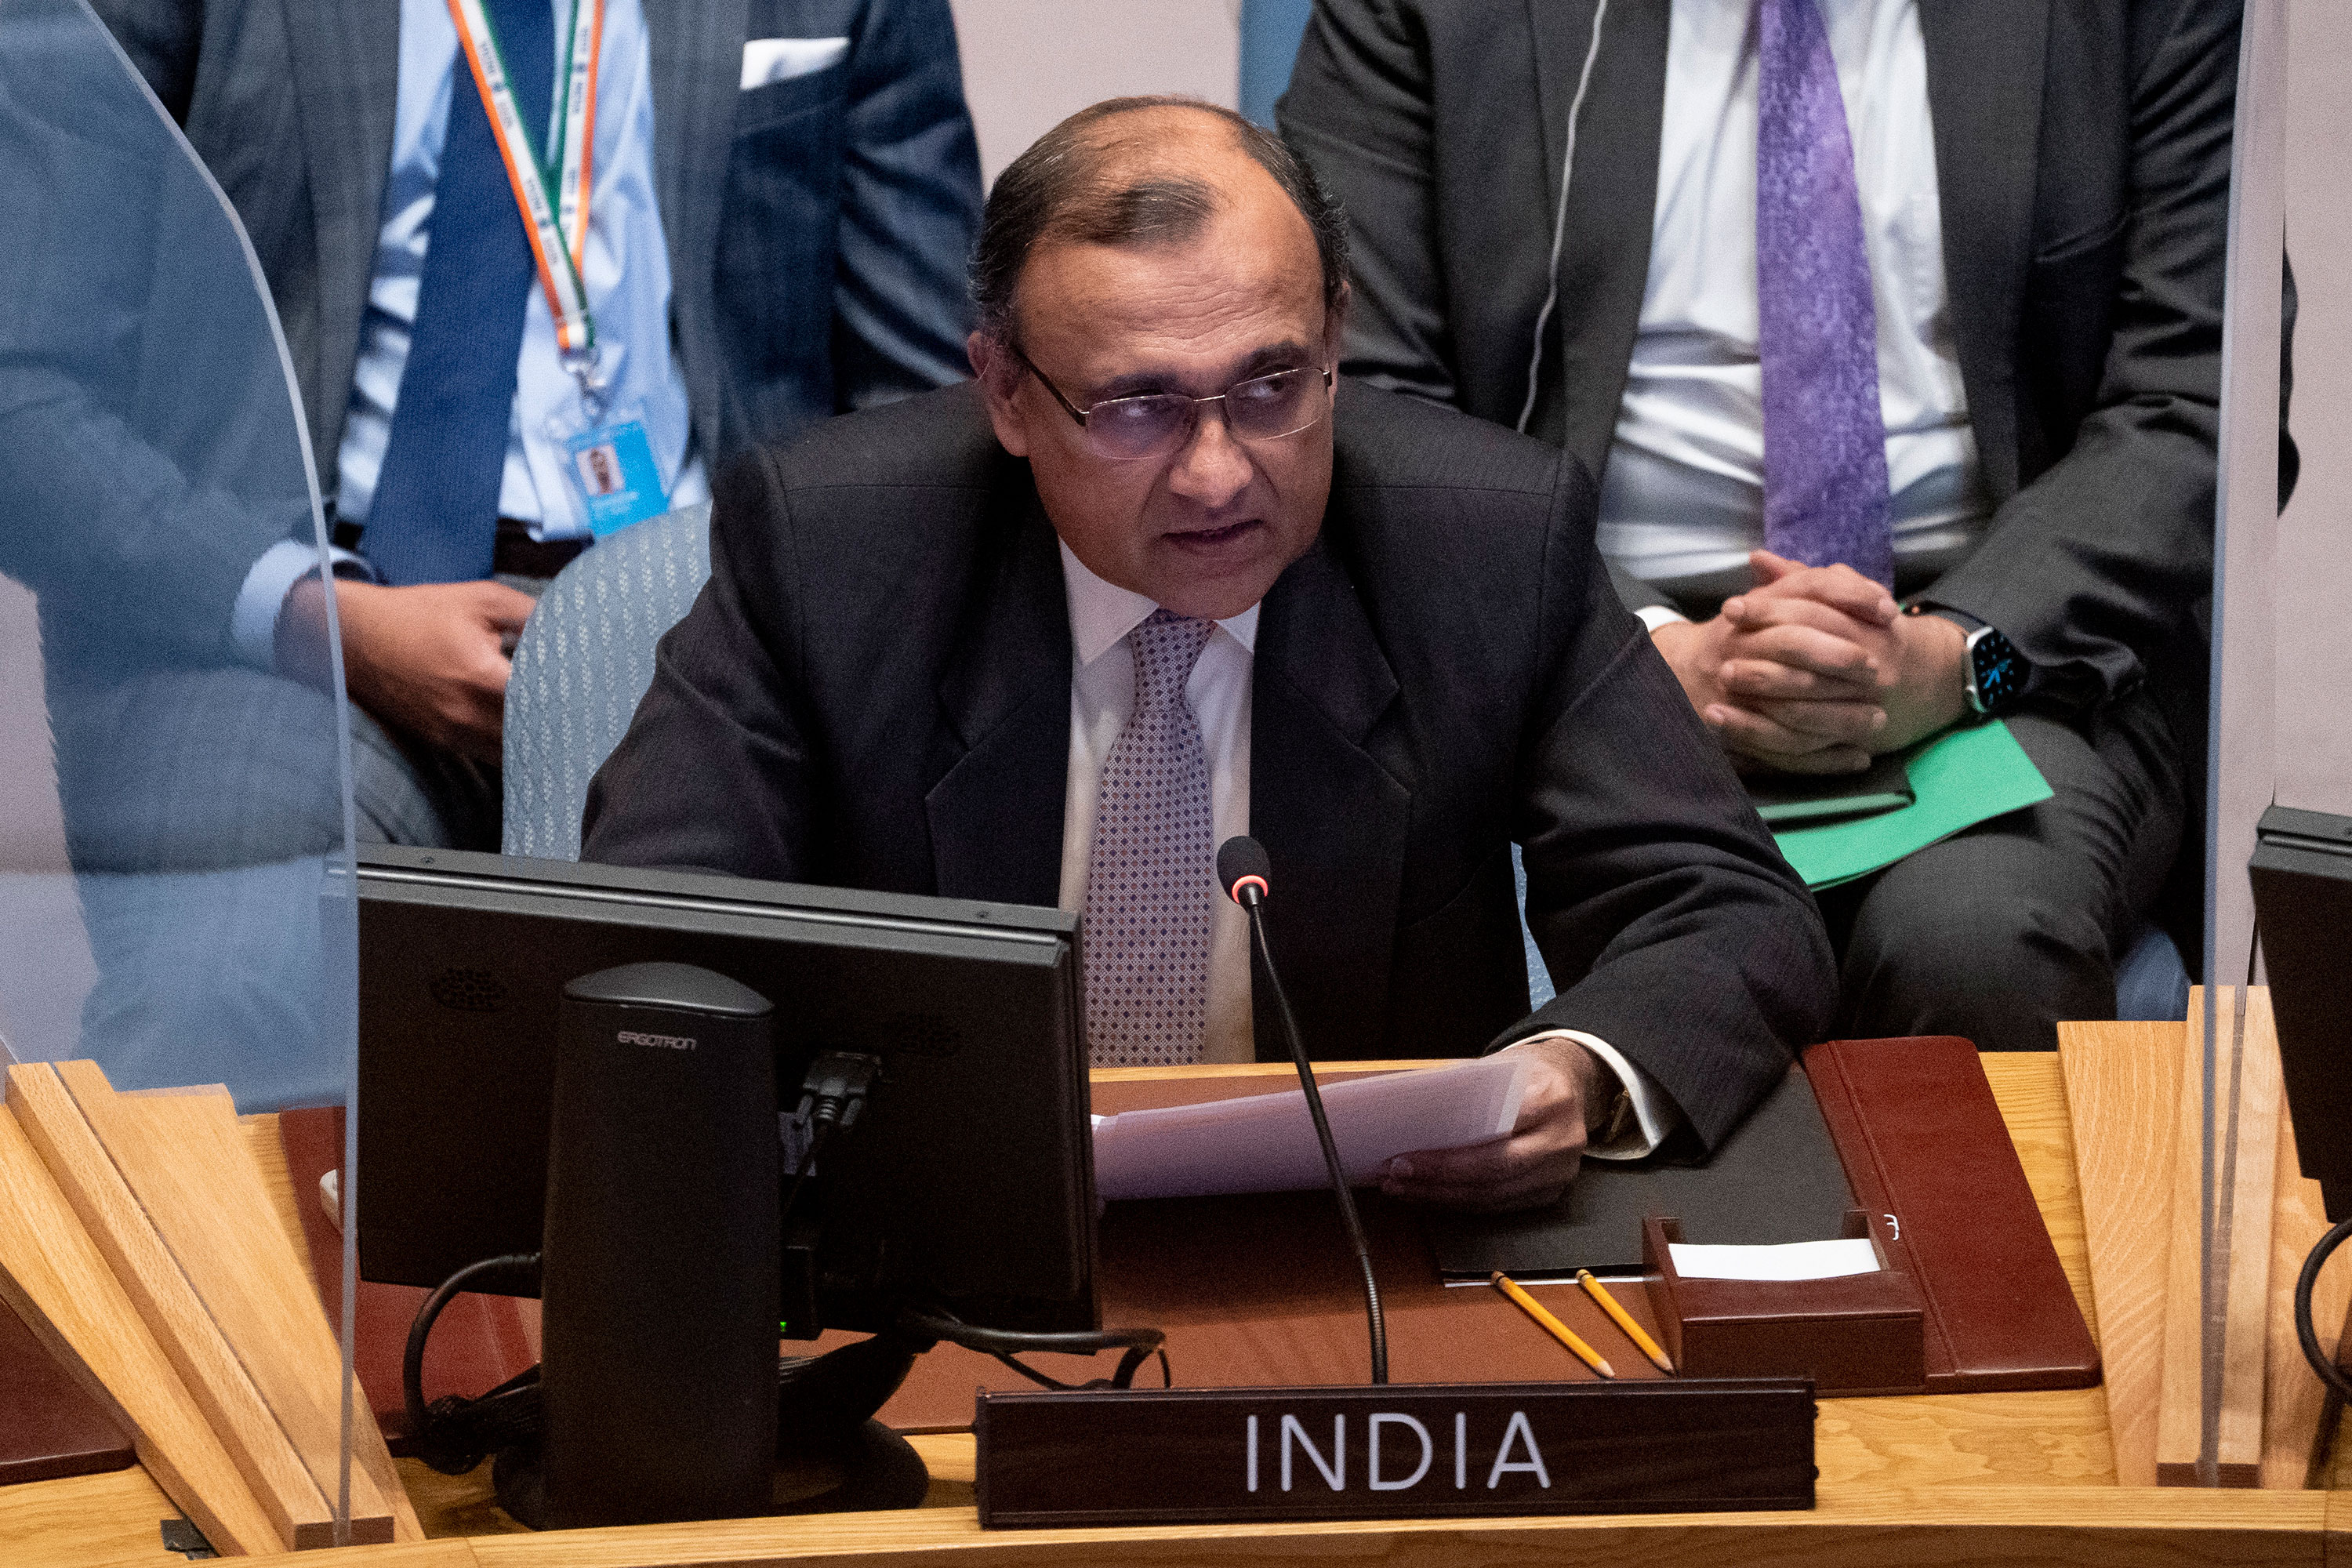 T. S. Tirumurti, Permanent Representative of India to the United Nations, speaks during a meeting of the UN Security Council on Tuesday.